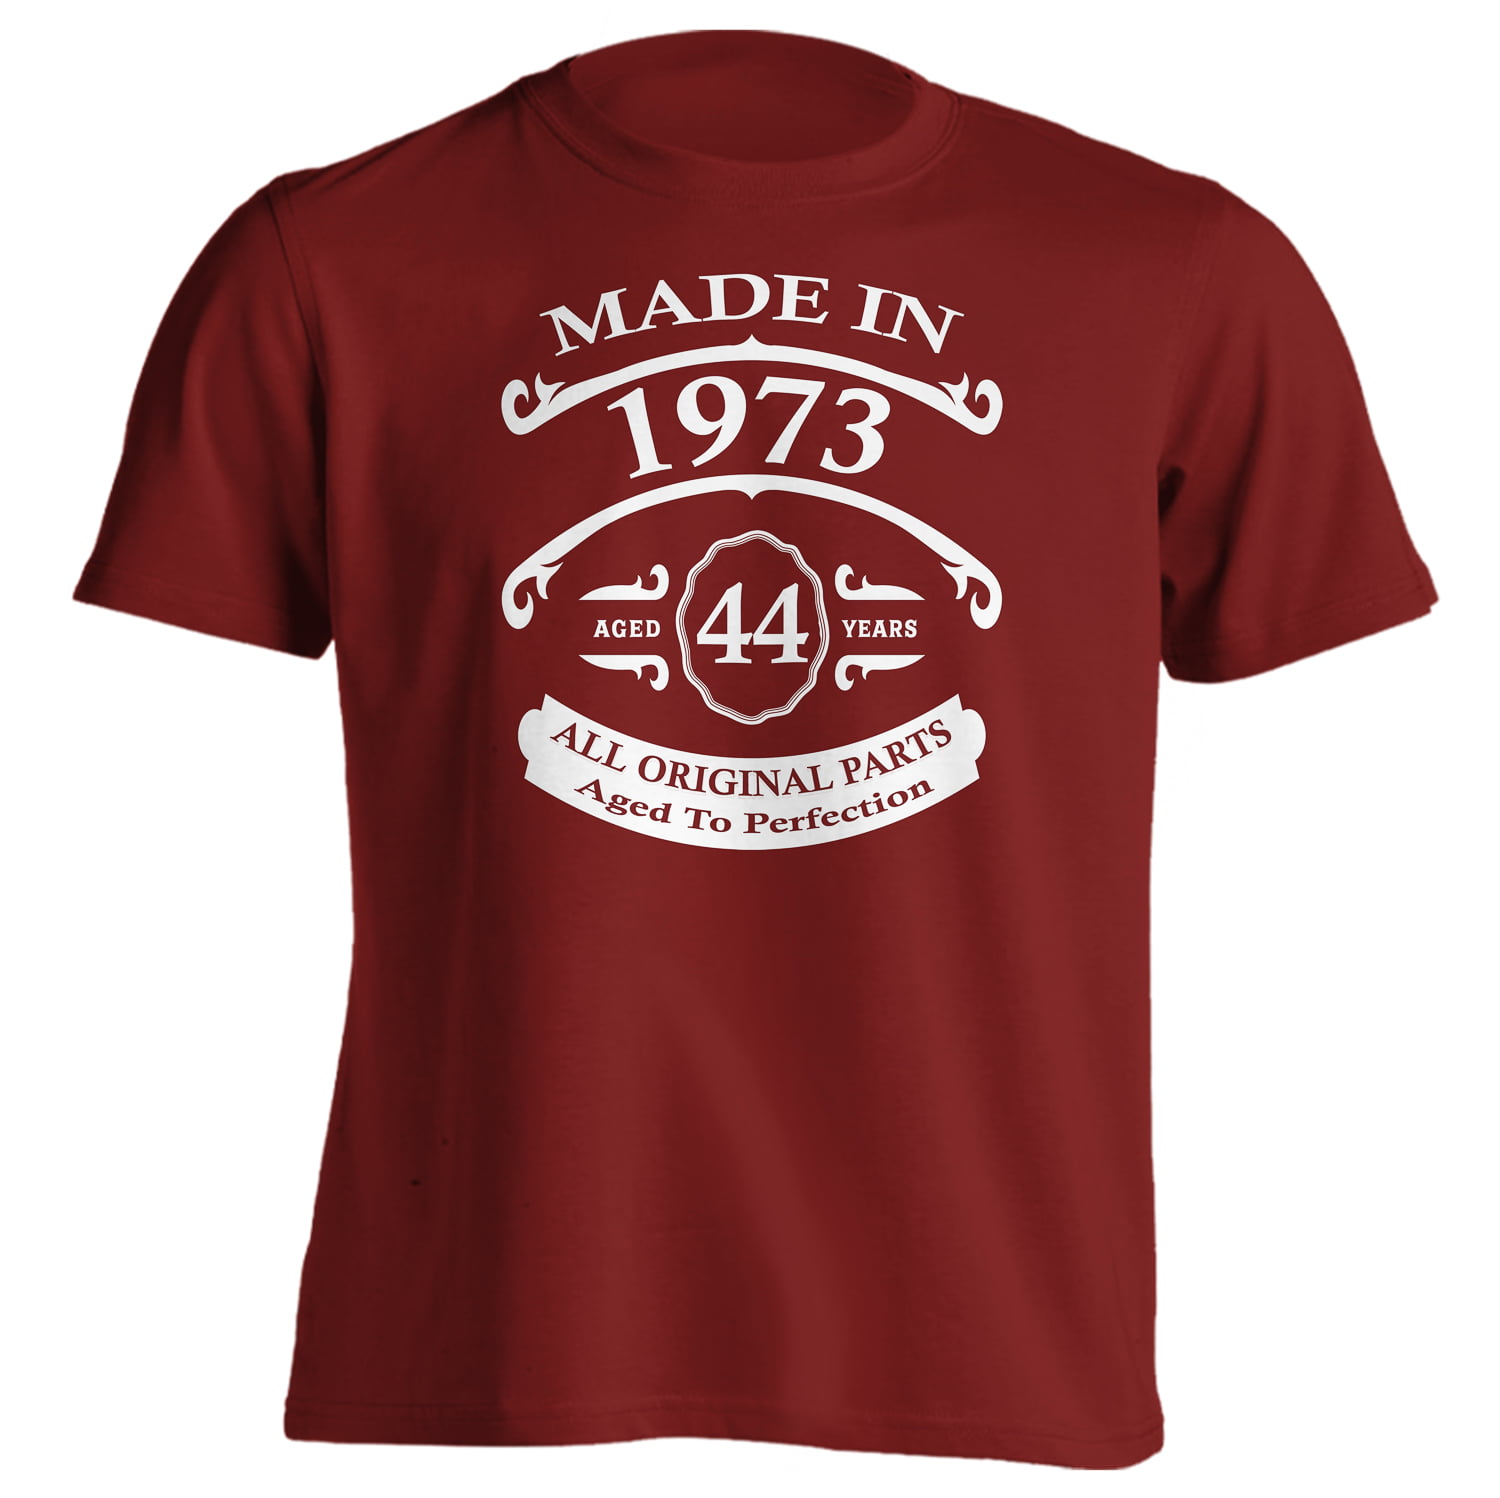 Birthday Tshirt Aged To Perfection Made in 1973 EXCELLENT GIFT IDEA S/M/L/XL/XXL 